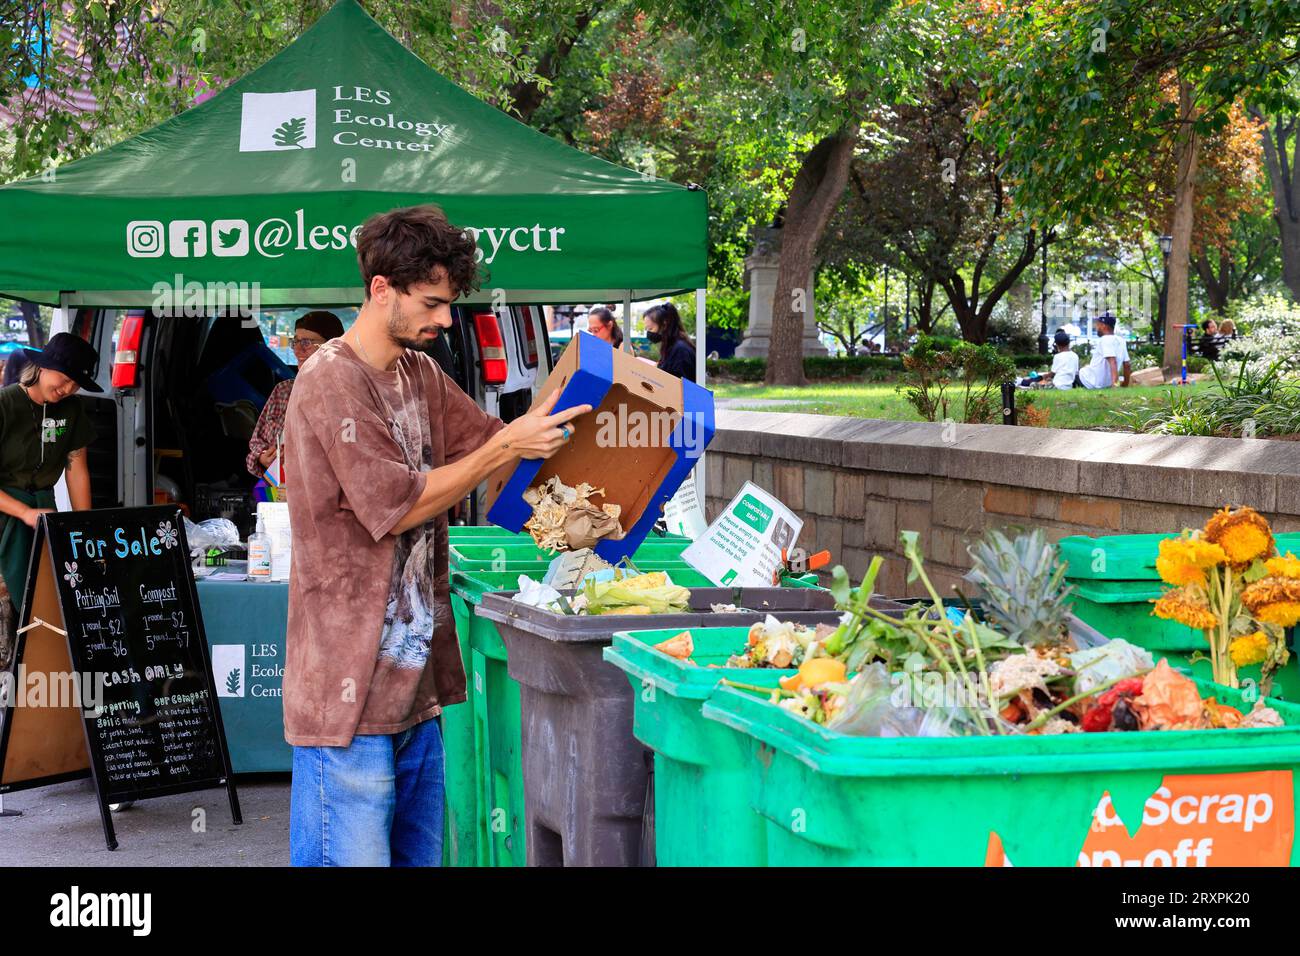 A person drops off food scraps and paper at the LES Ecology Center compost drop off booth in the Union Square Greenmarket, New York City. Stock Photo